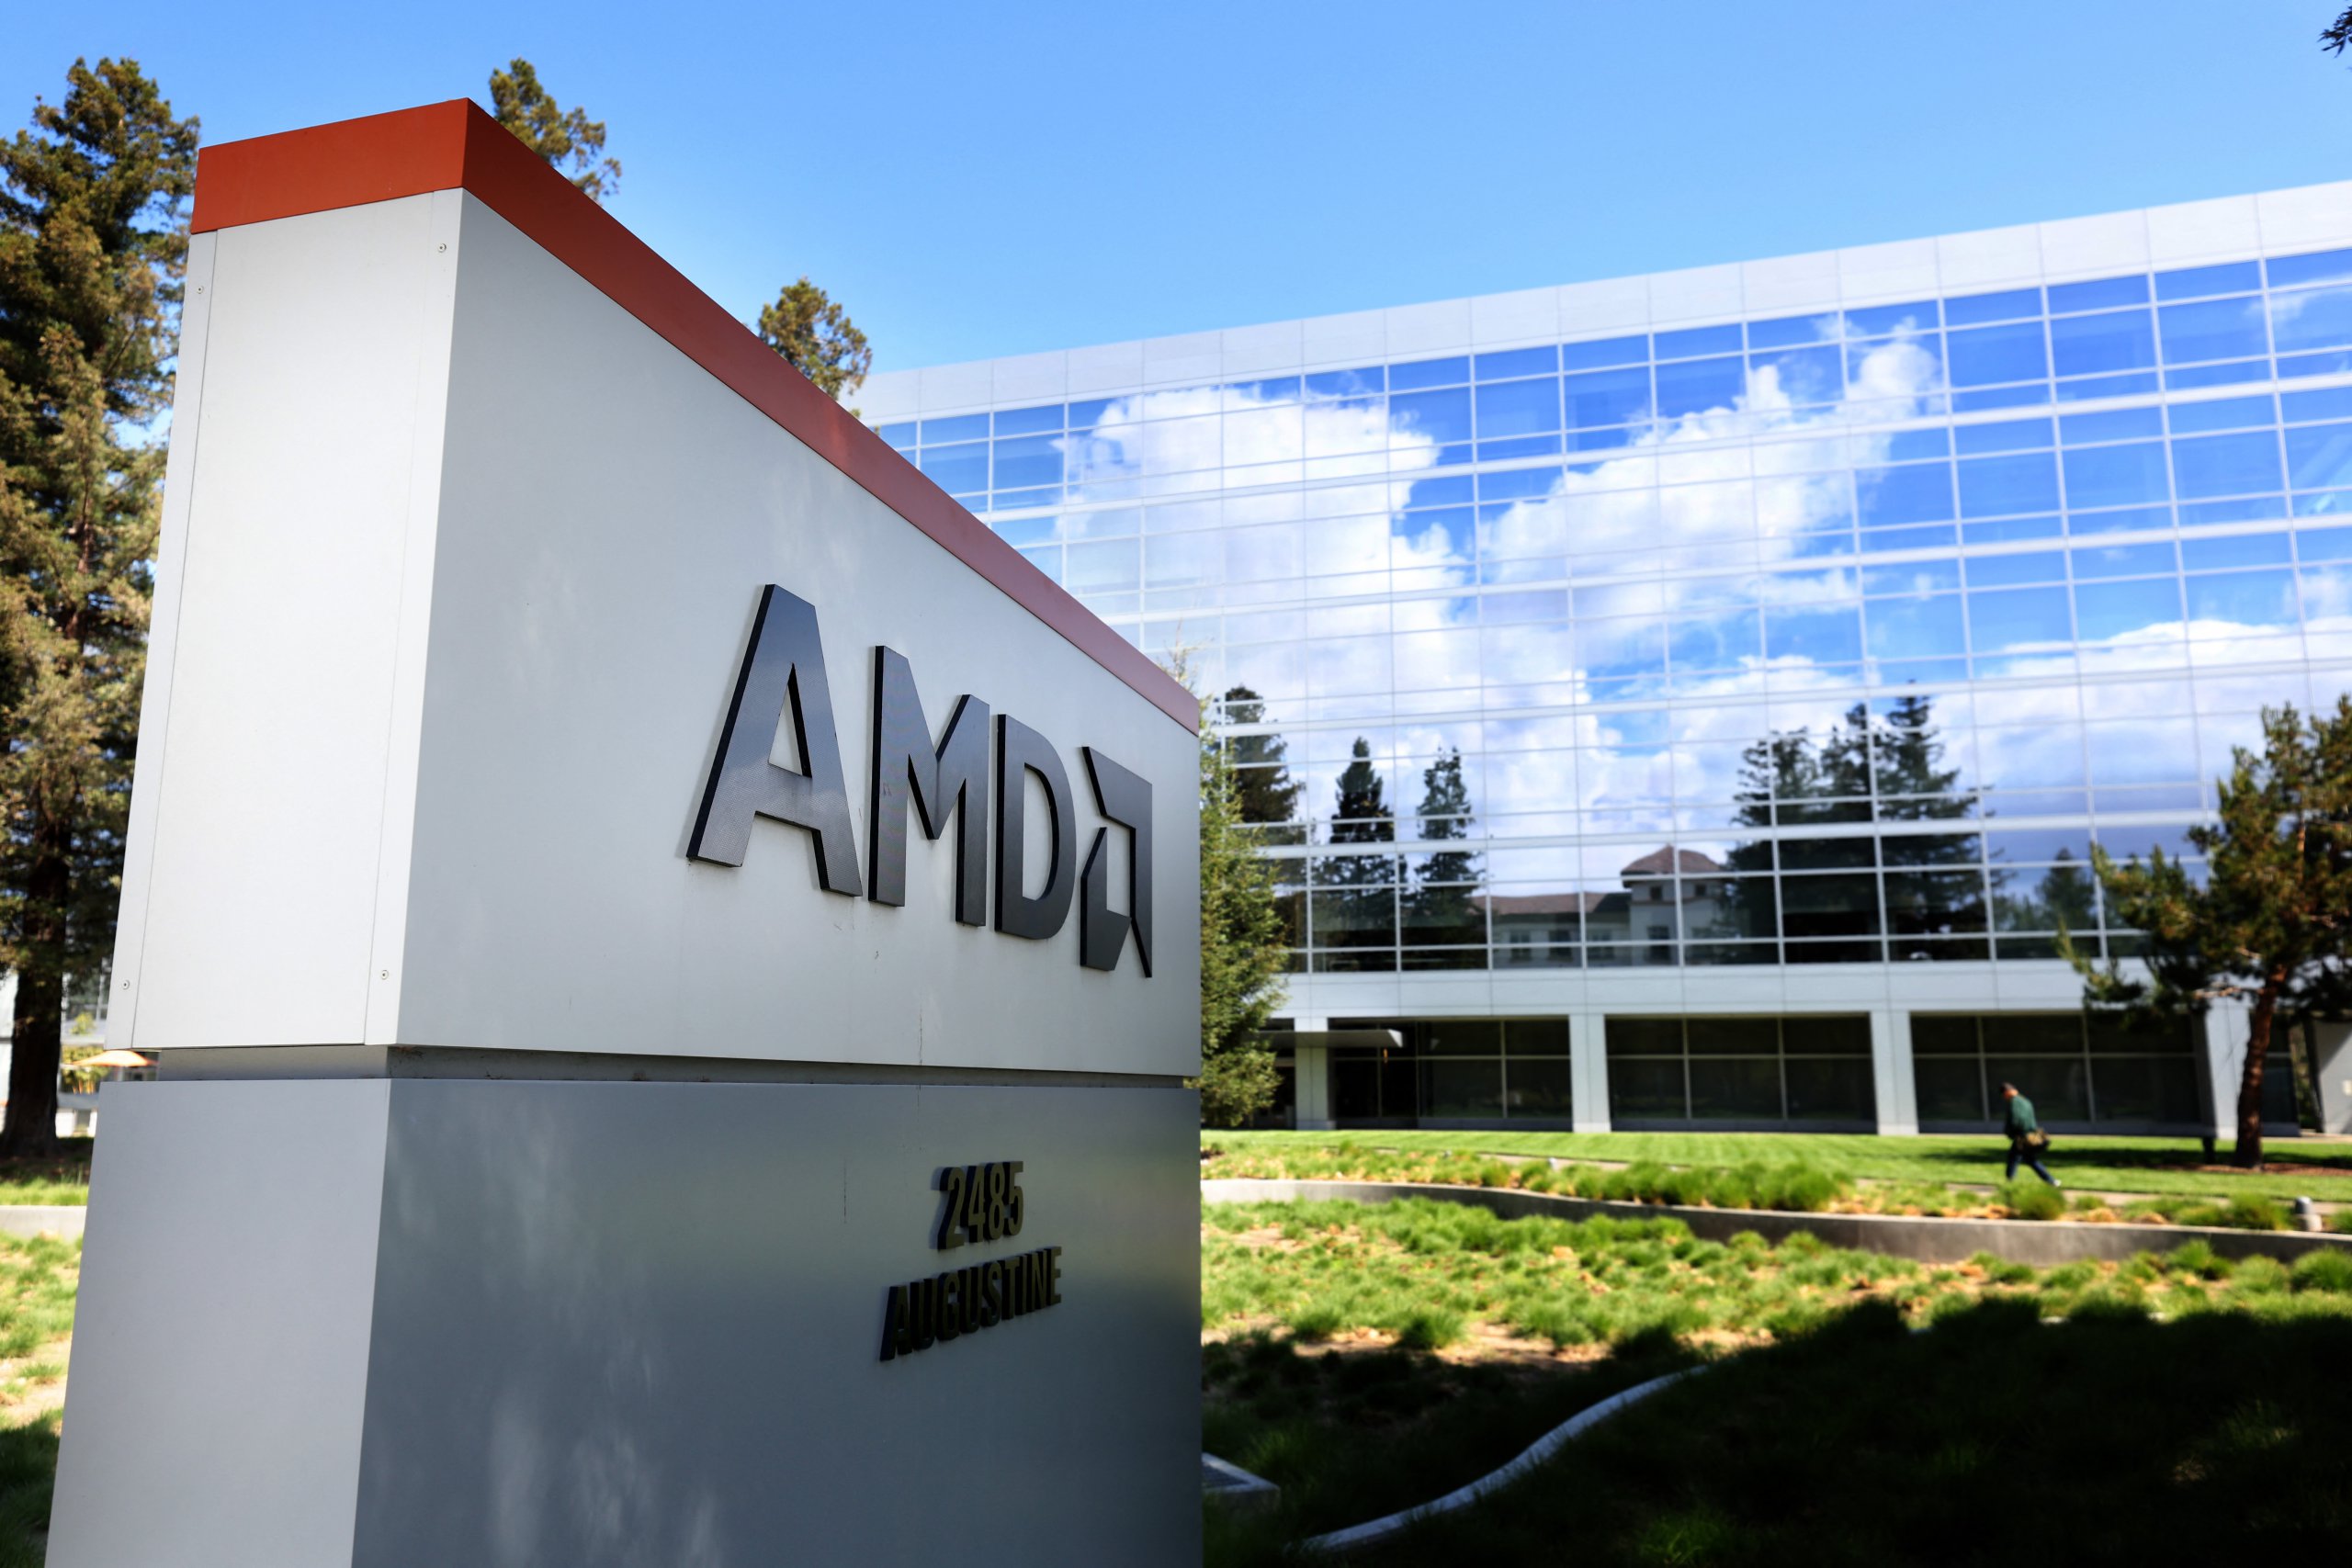 AMD will run electronic design automation (EDA) for its chip design workloads on Google Cloud